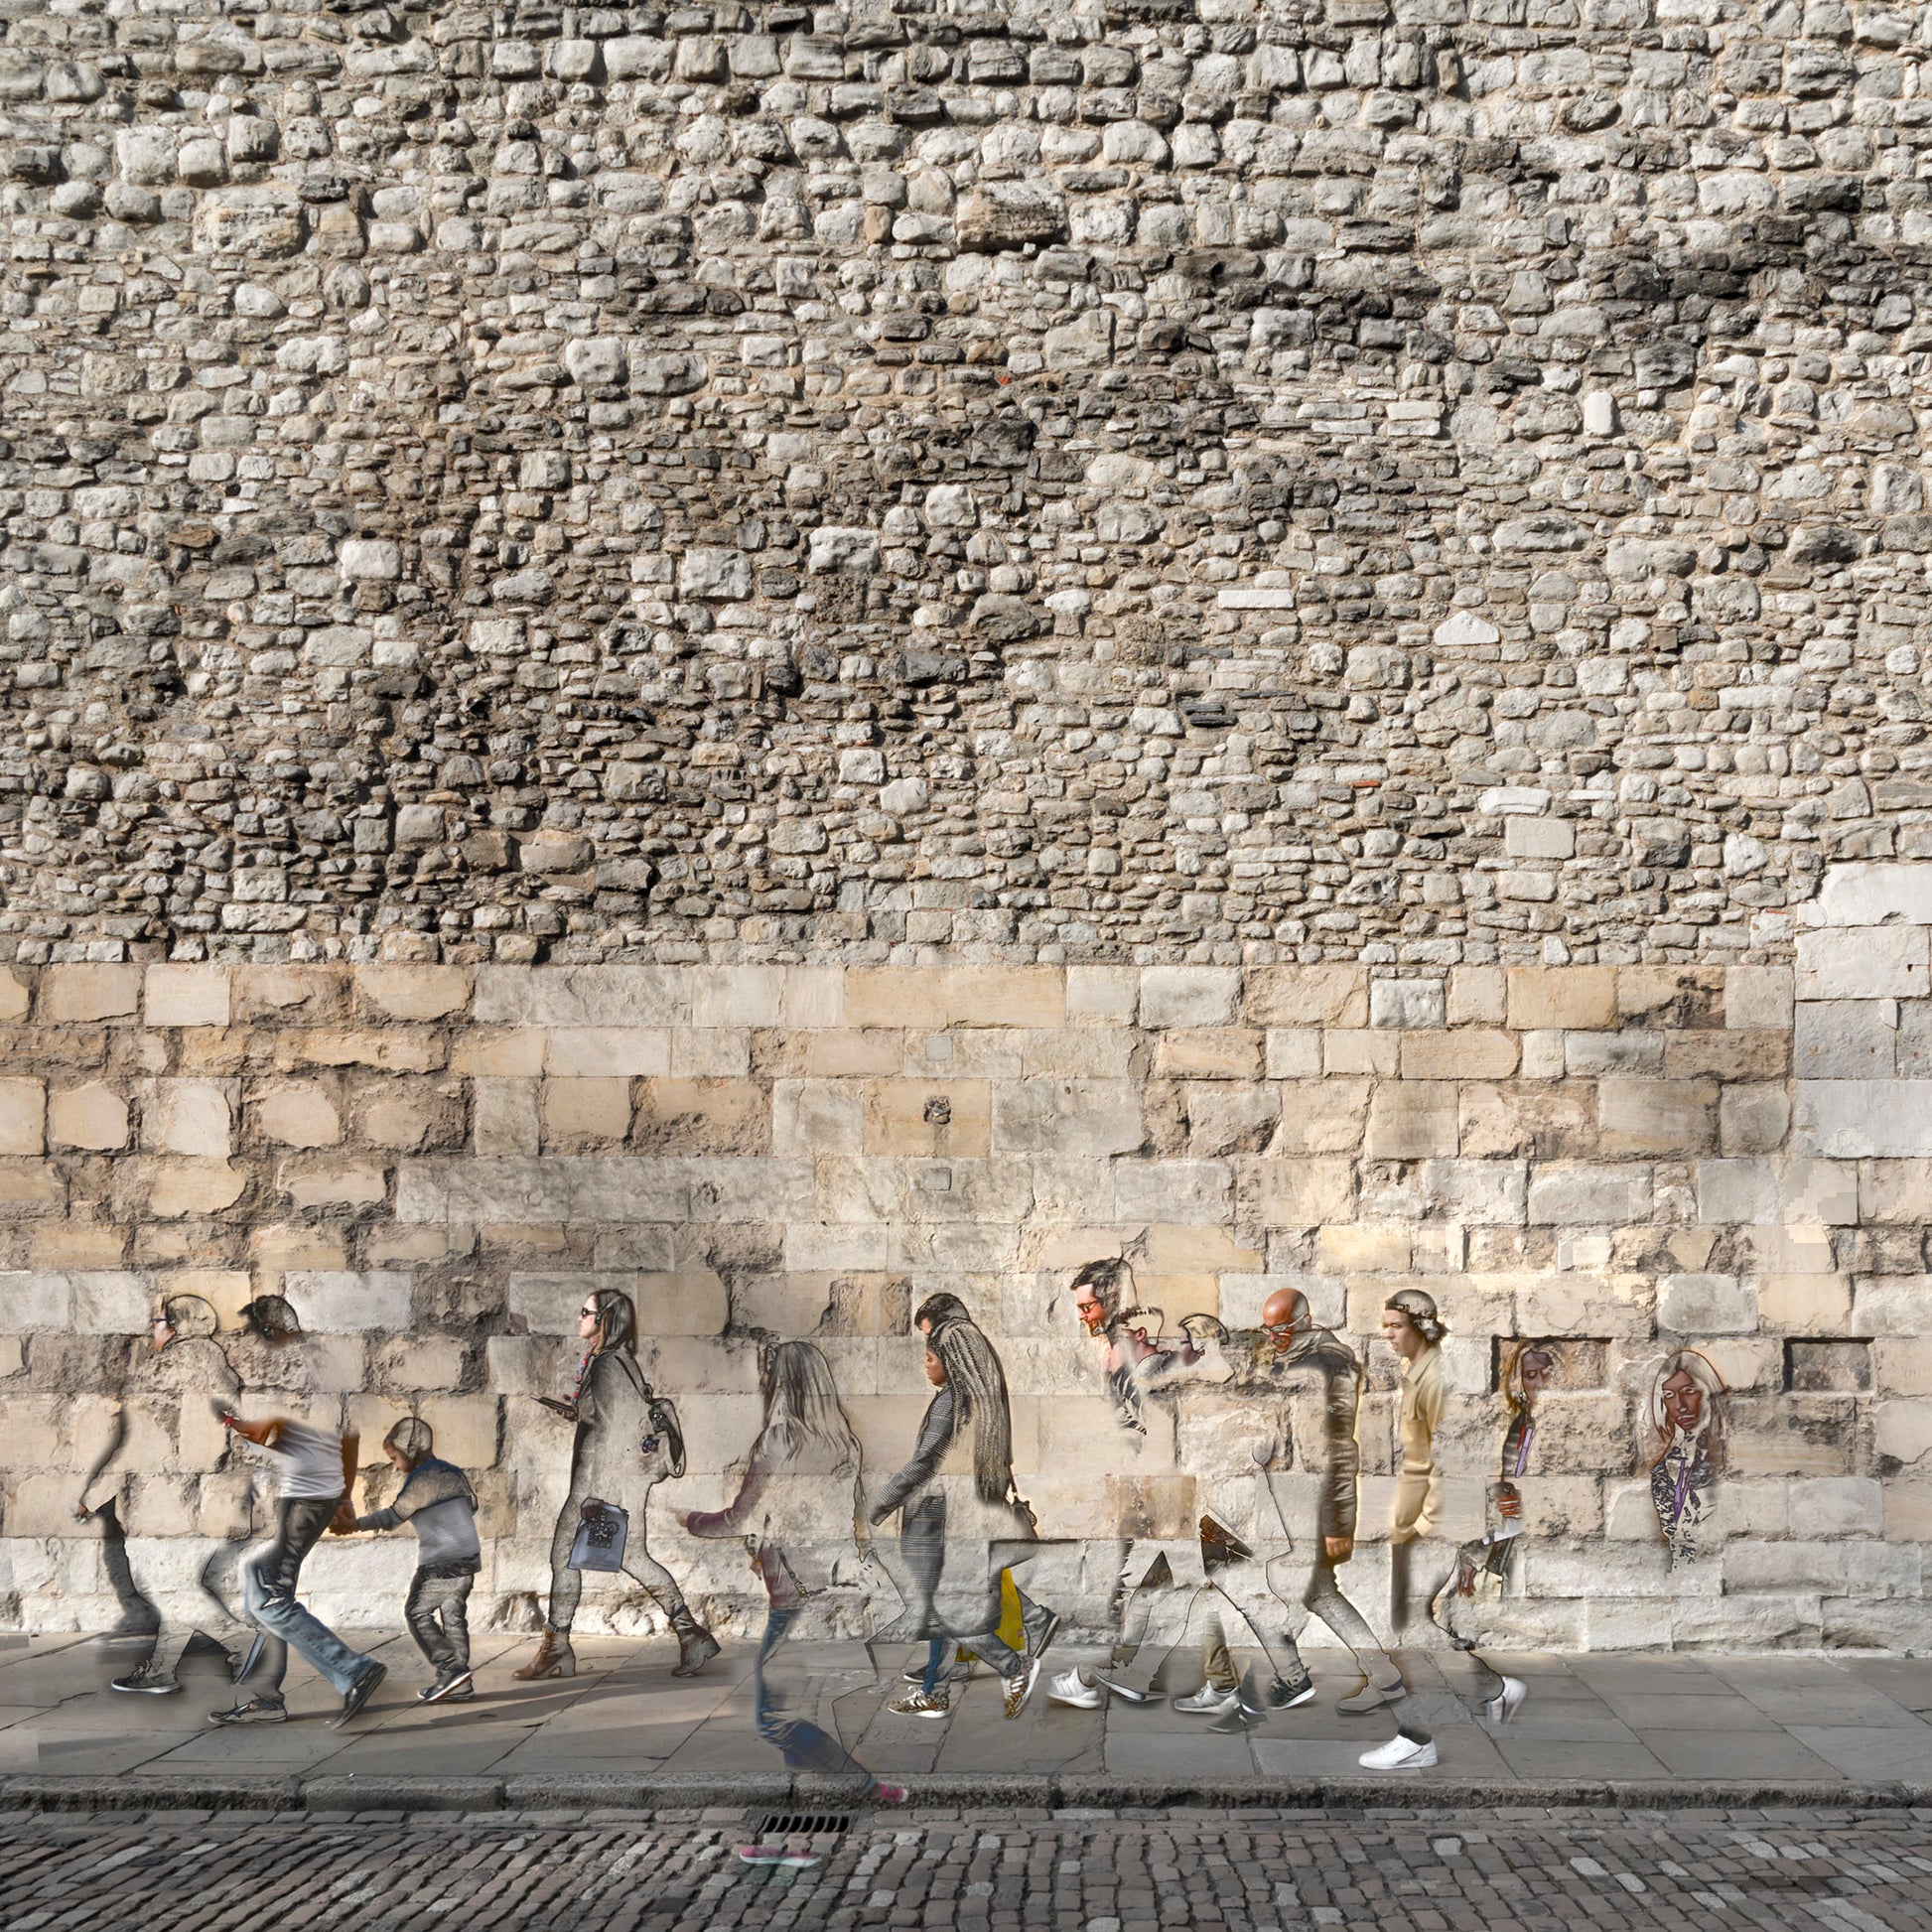 Daniel-Sambraus-Street-Scene-Tower-Of-London-Limited-Edition-TAP-Galleries